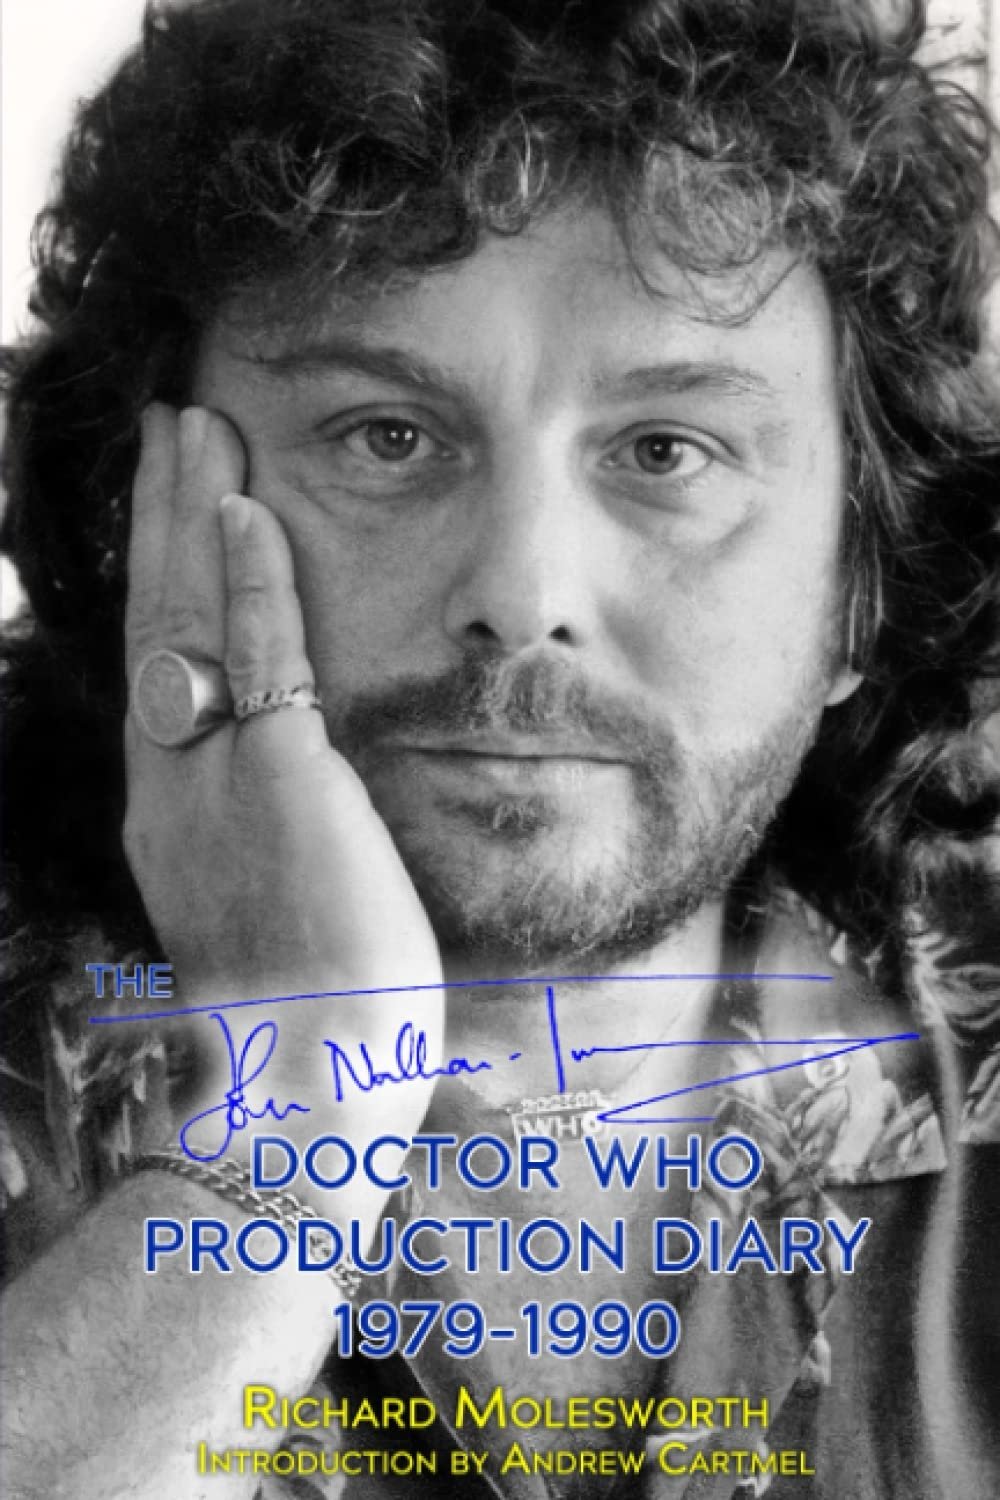 Reviewed: The John Nathan-Turner Doctor Who Production Diary 1979-1990